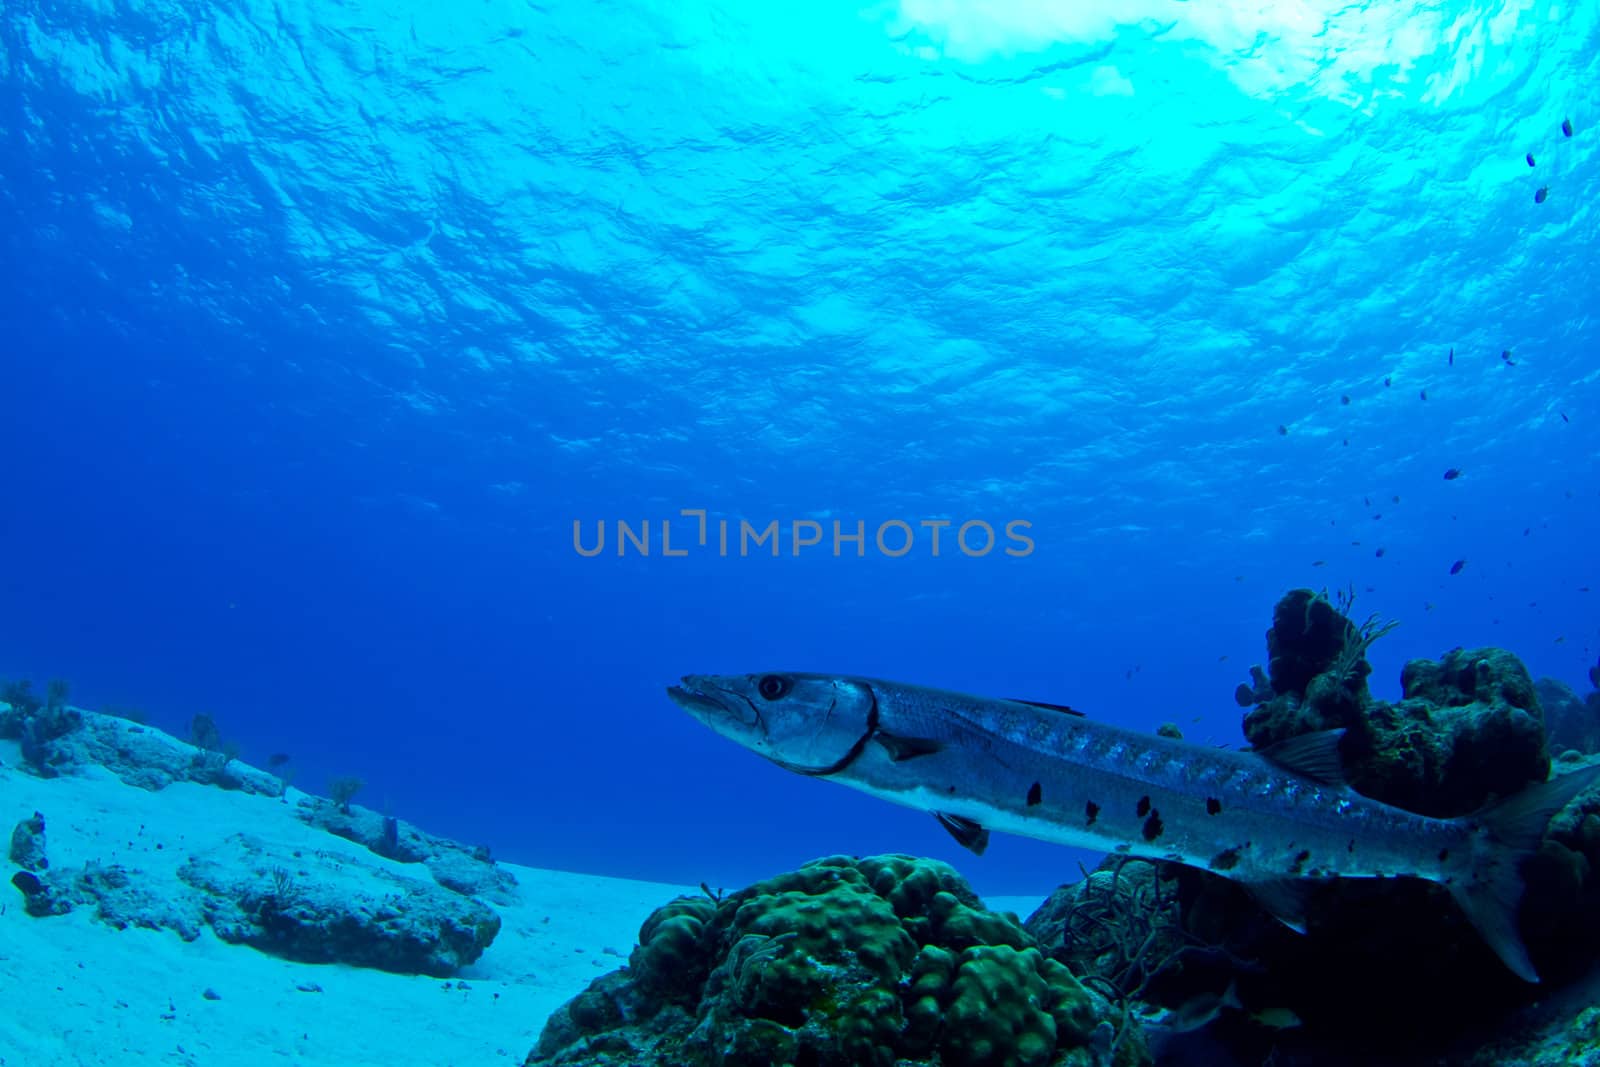 A large barracuda on a tropical reef hiding behind coral